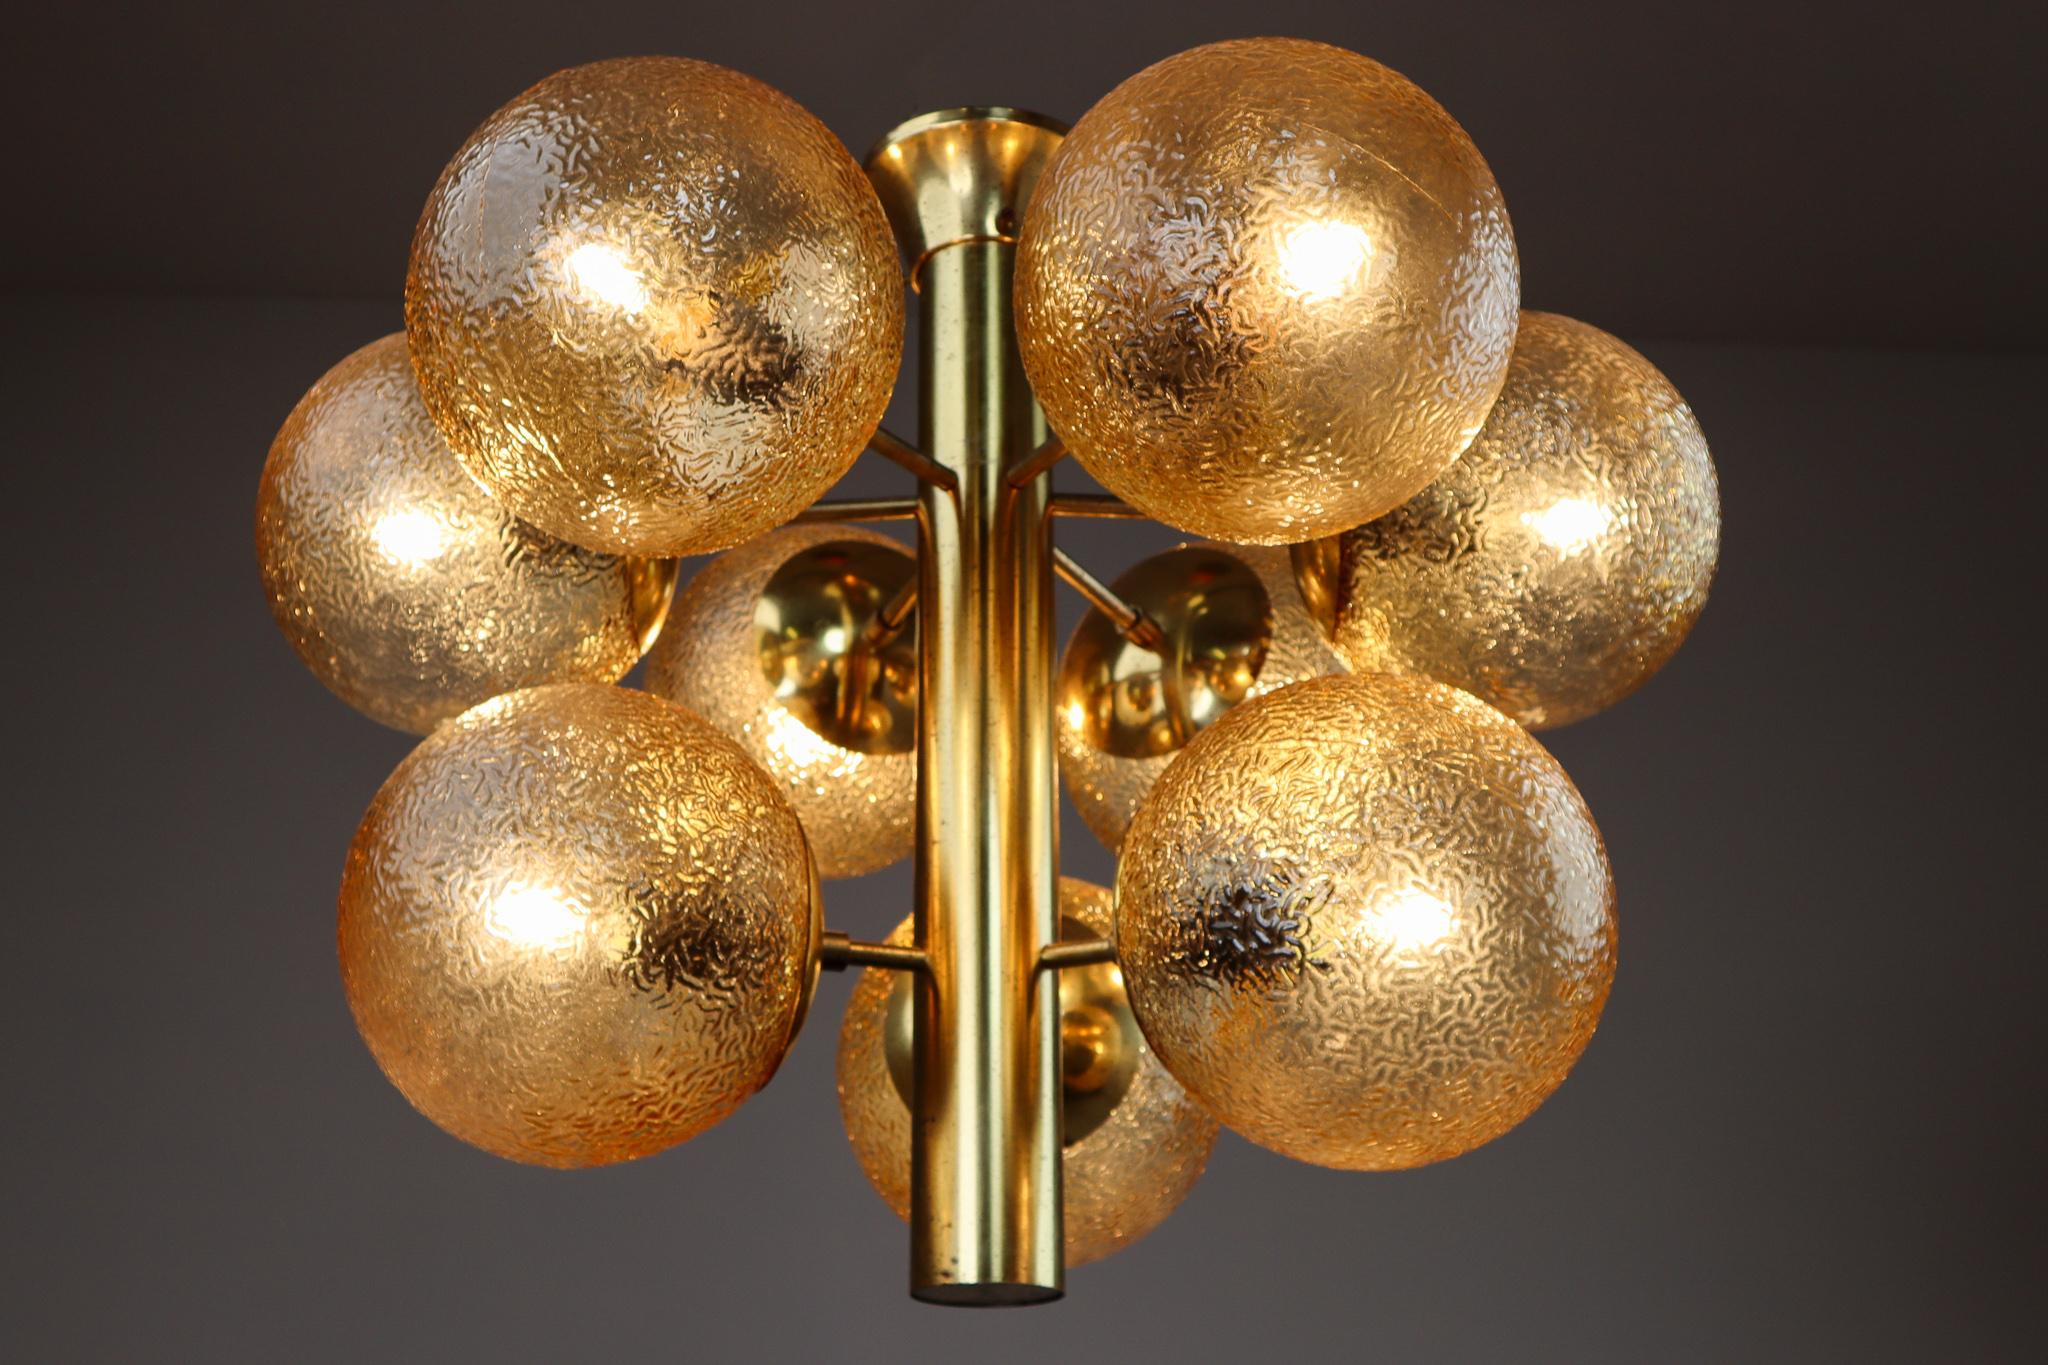 Stunning set of 4 Sputnik chandeliers with 9 handmade glass globes and patinated brass by Kaiser Leuchten, Germany, 1960s.This chandelier will contribute to a luxurious character of the (hotel-bar) interior. Very good vintage condition without